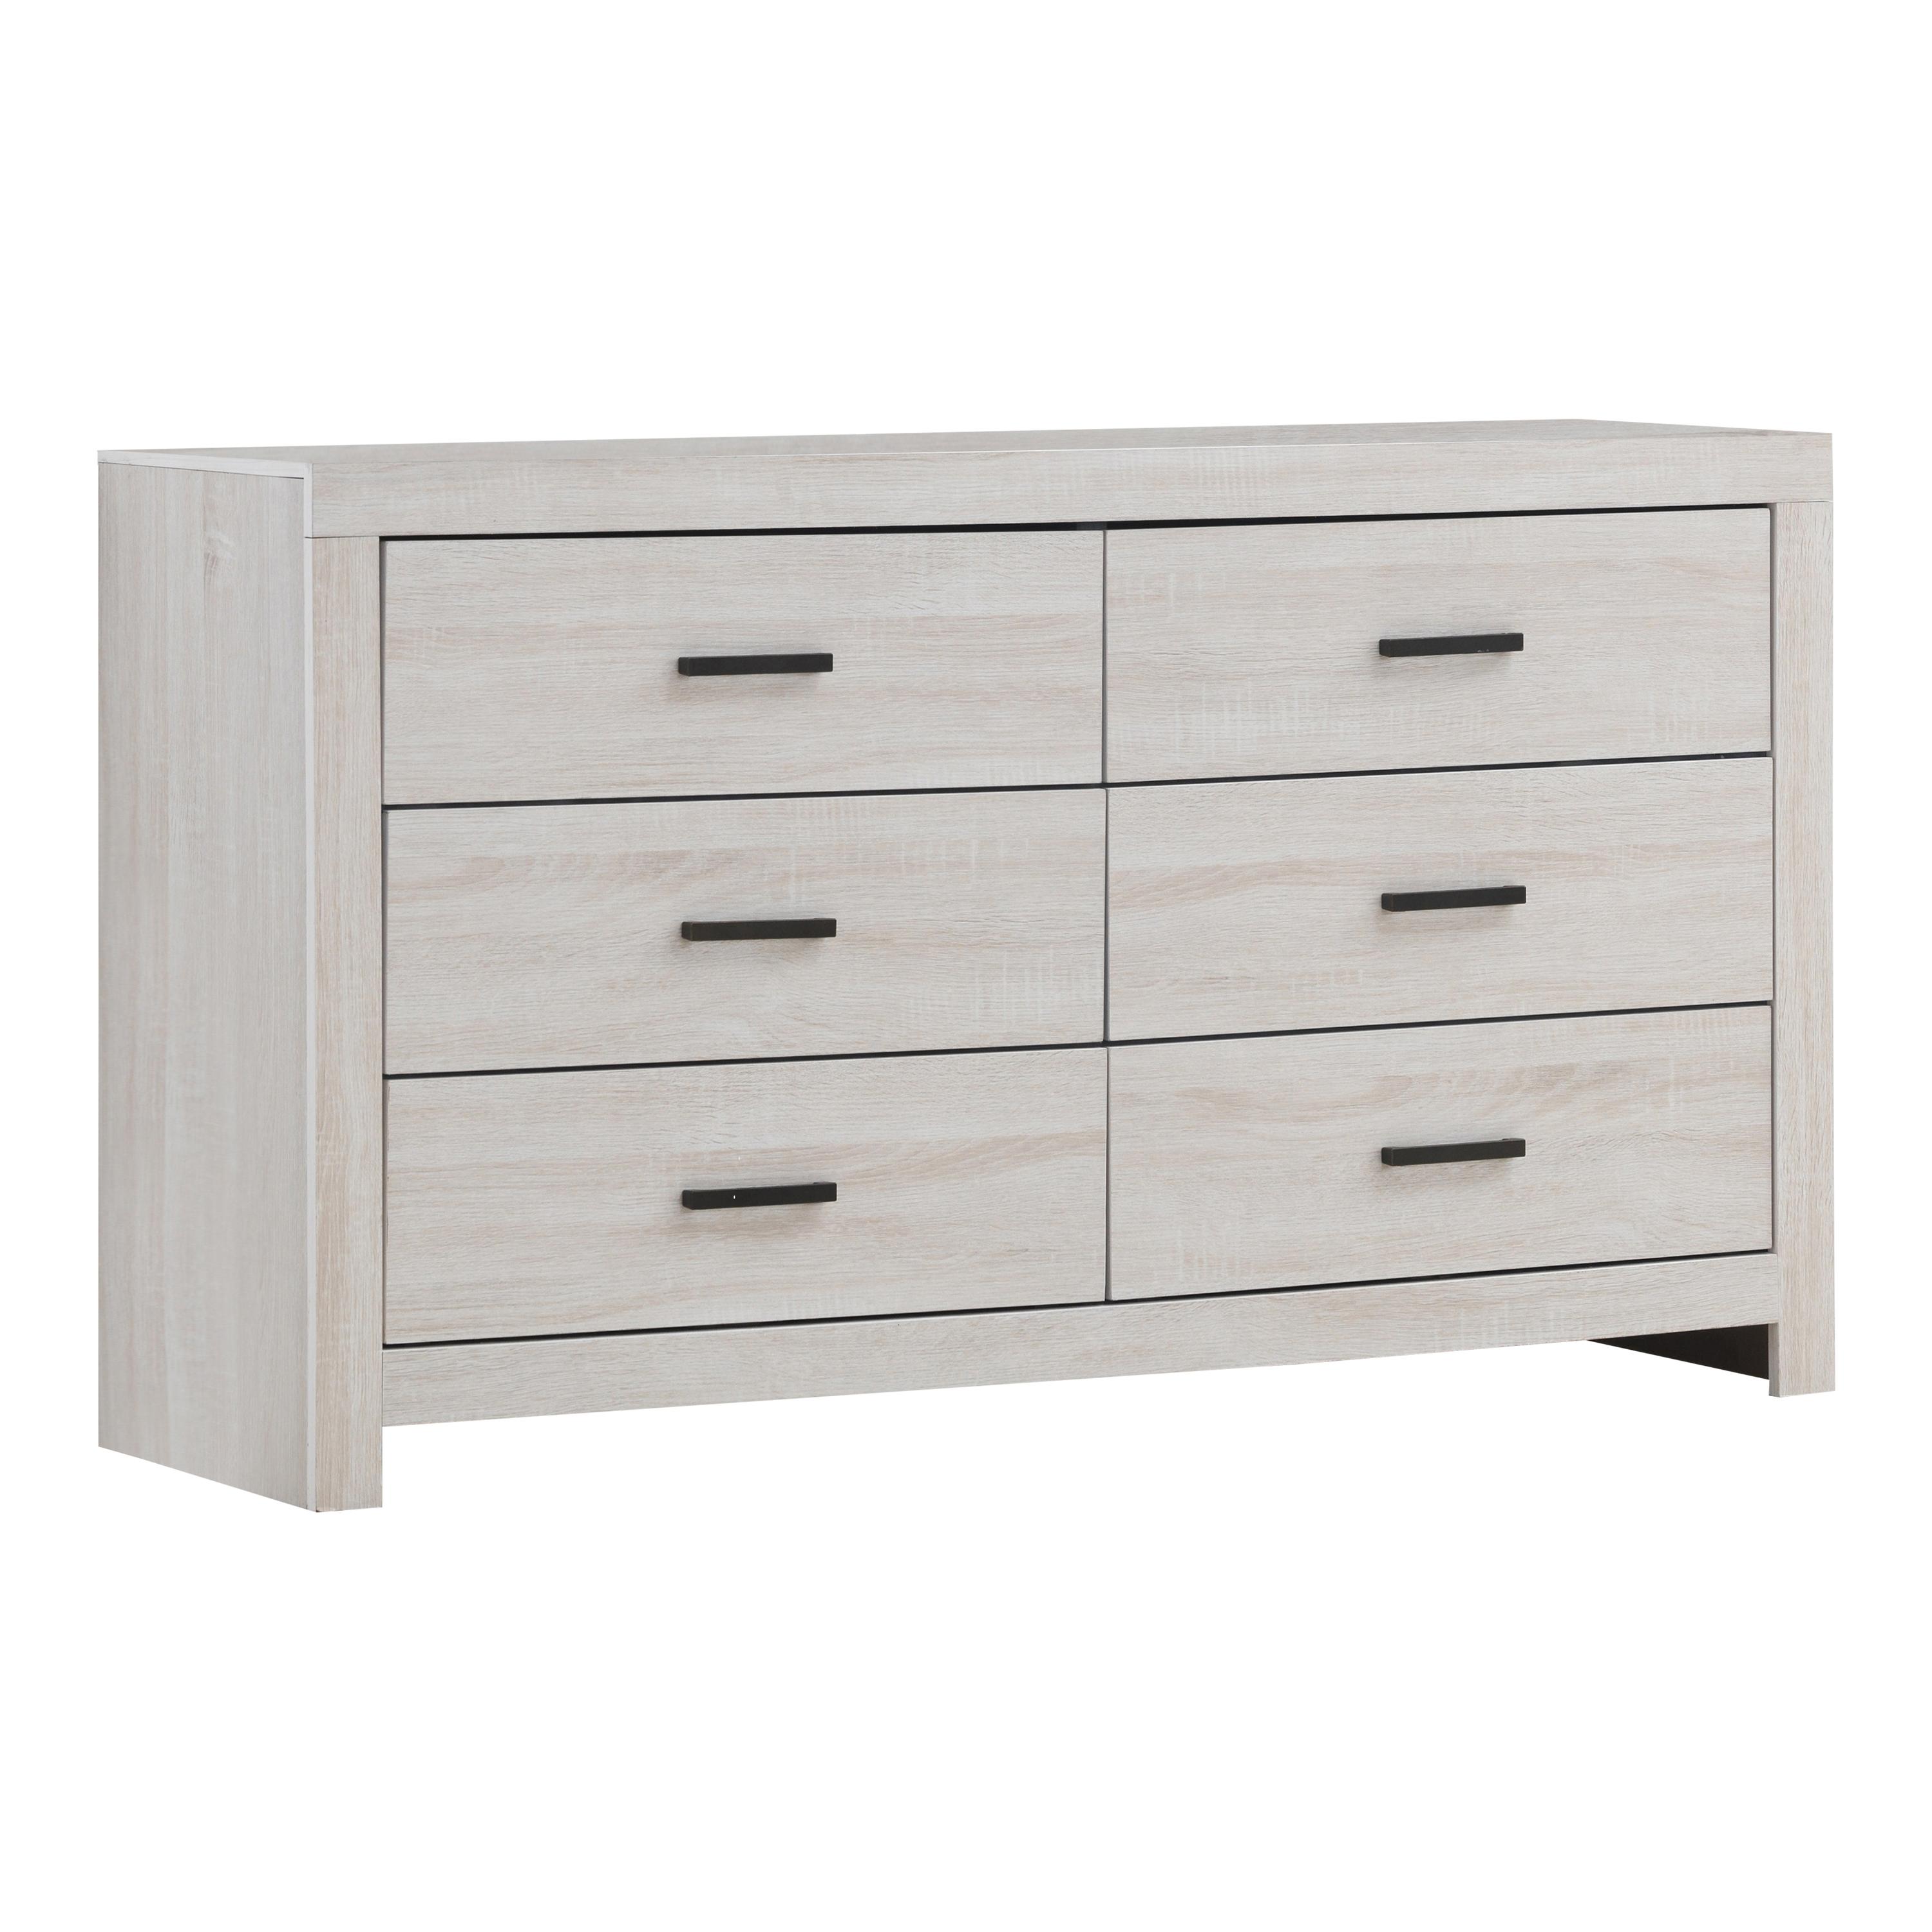 Rustic Dresser 207053 Marion 207053 in White 